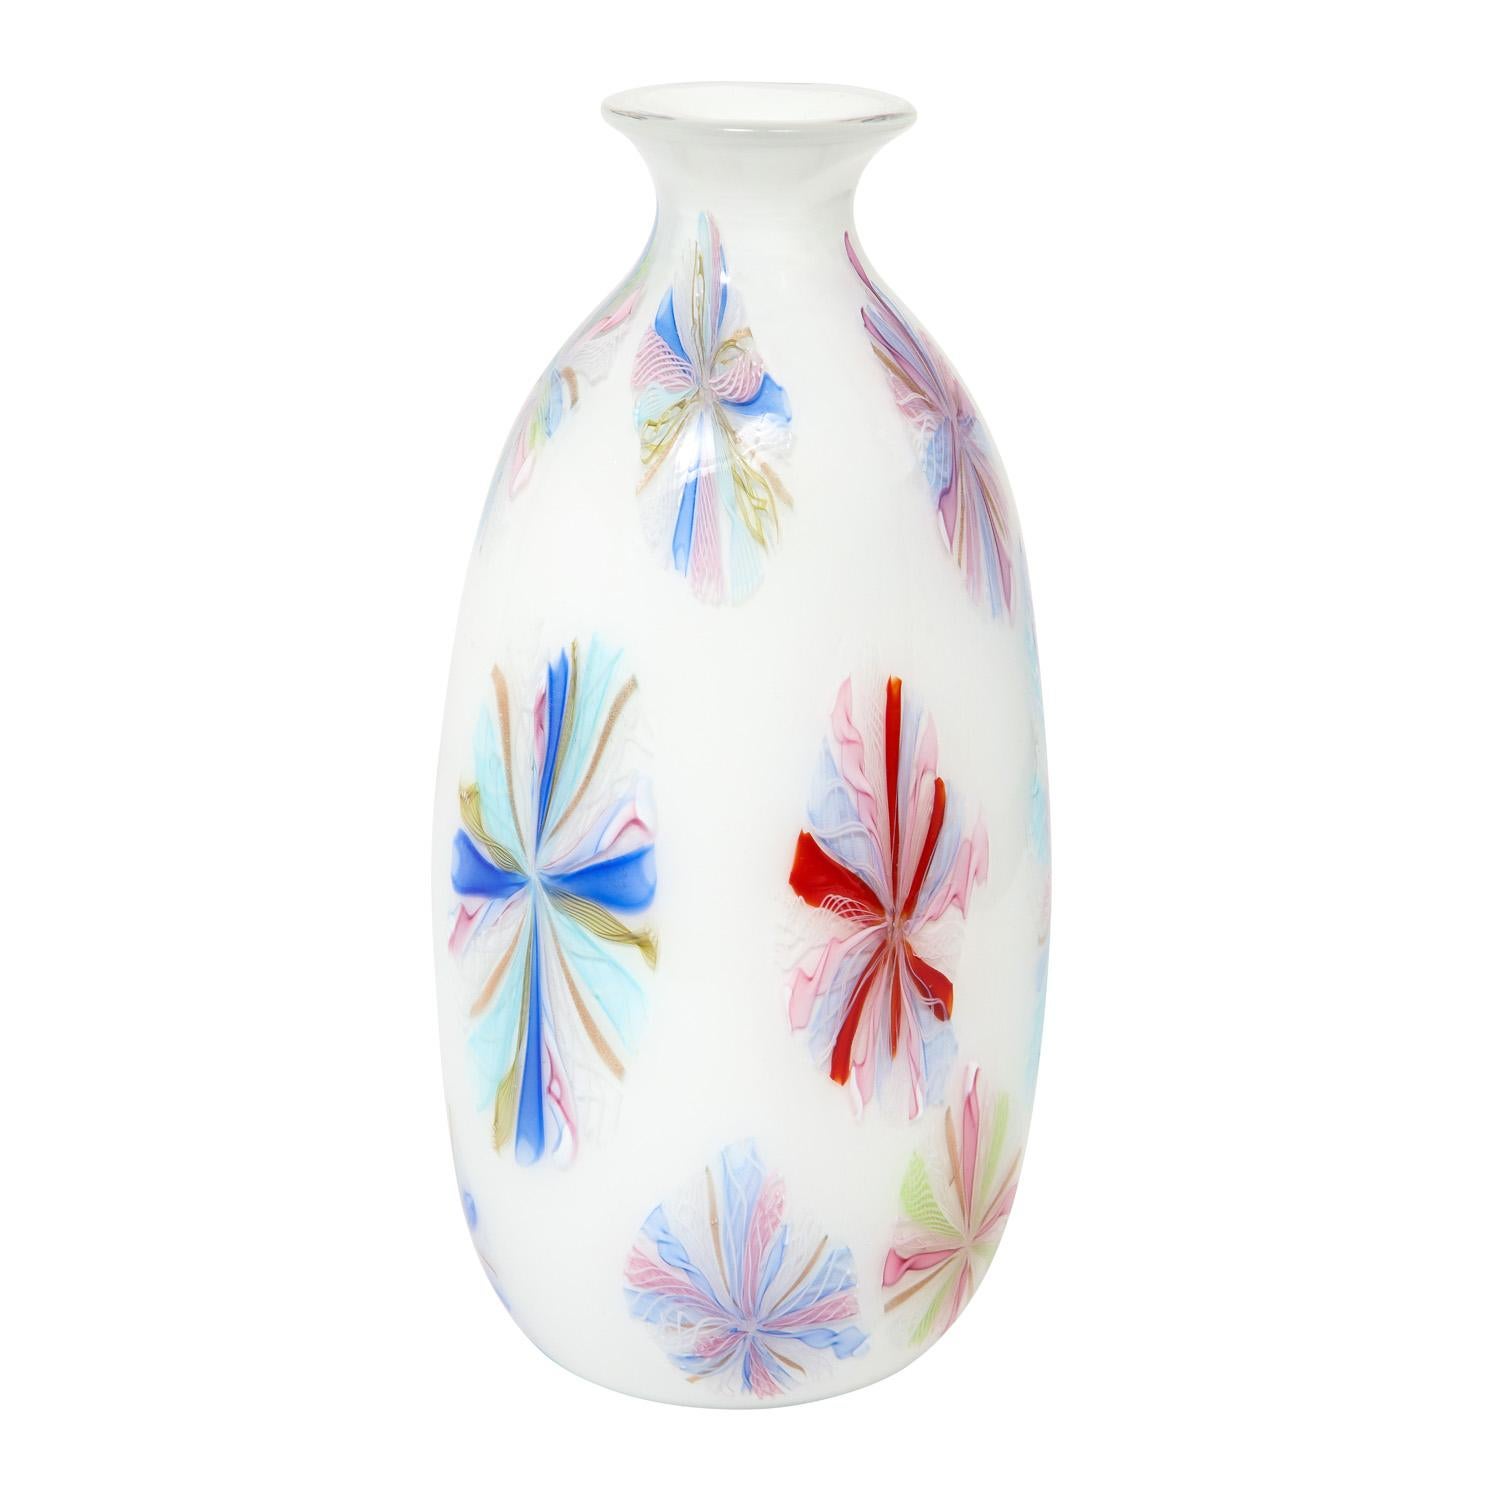 Large hand-blown glass vase, colorful starburst murrhines over white glass, by Arte Vetraria Muranese or A.V.E.M., Murano Italy, 1950's. This vase is like a jewel.